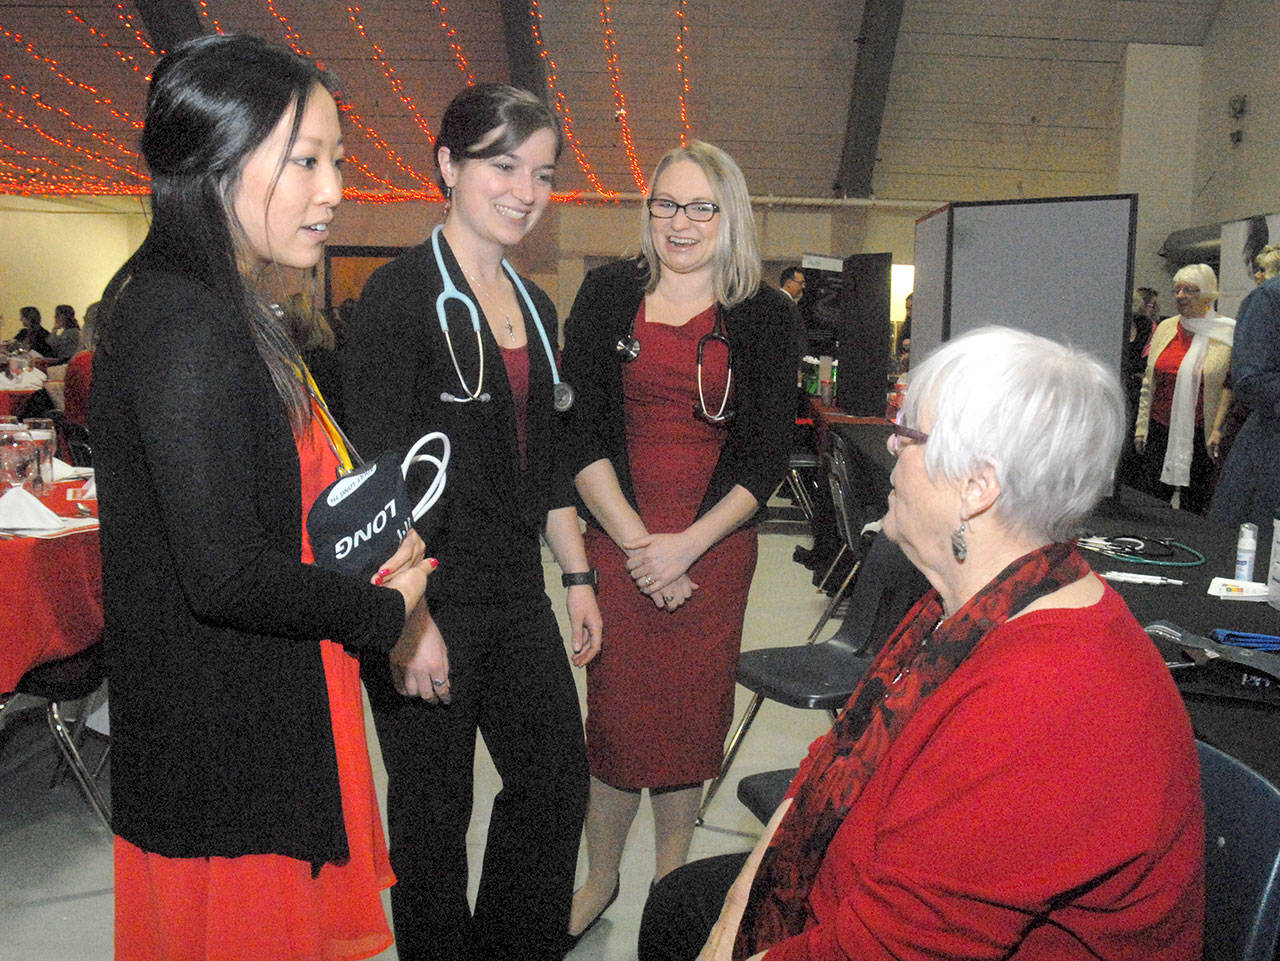 Olympic Medical Center workers, from left, exercise specialist Sherry Xiong, nuclear medical technician Brittany Payseno and cardiac sonographer Kerie Swegle talk with guest Dee Kurtz before the start of Friday’s 11th annual Red, Set, Go! Heart Luncheon at Vern Burton Community Center in Port Angeles. The charity event, hosted by the Jamestown S’Klallam Tribe, benefitted the Olympic Medical Center Foundation with the goal of raising funds toward the purchase of a nuclear camera for cardiac stress testing. (Keith Thorpe/Peninsula Daily News)